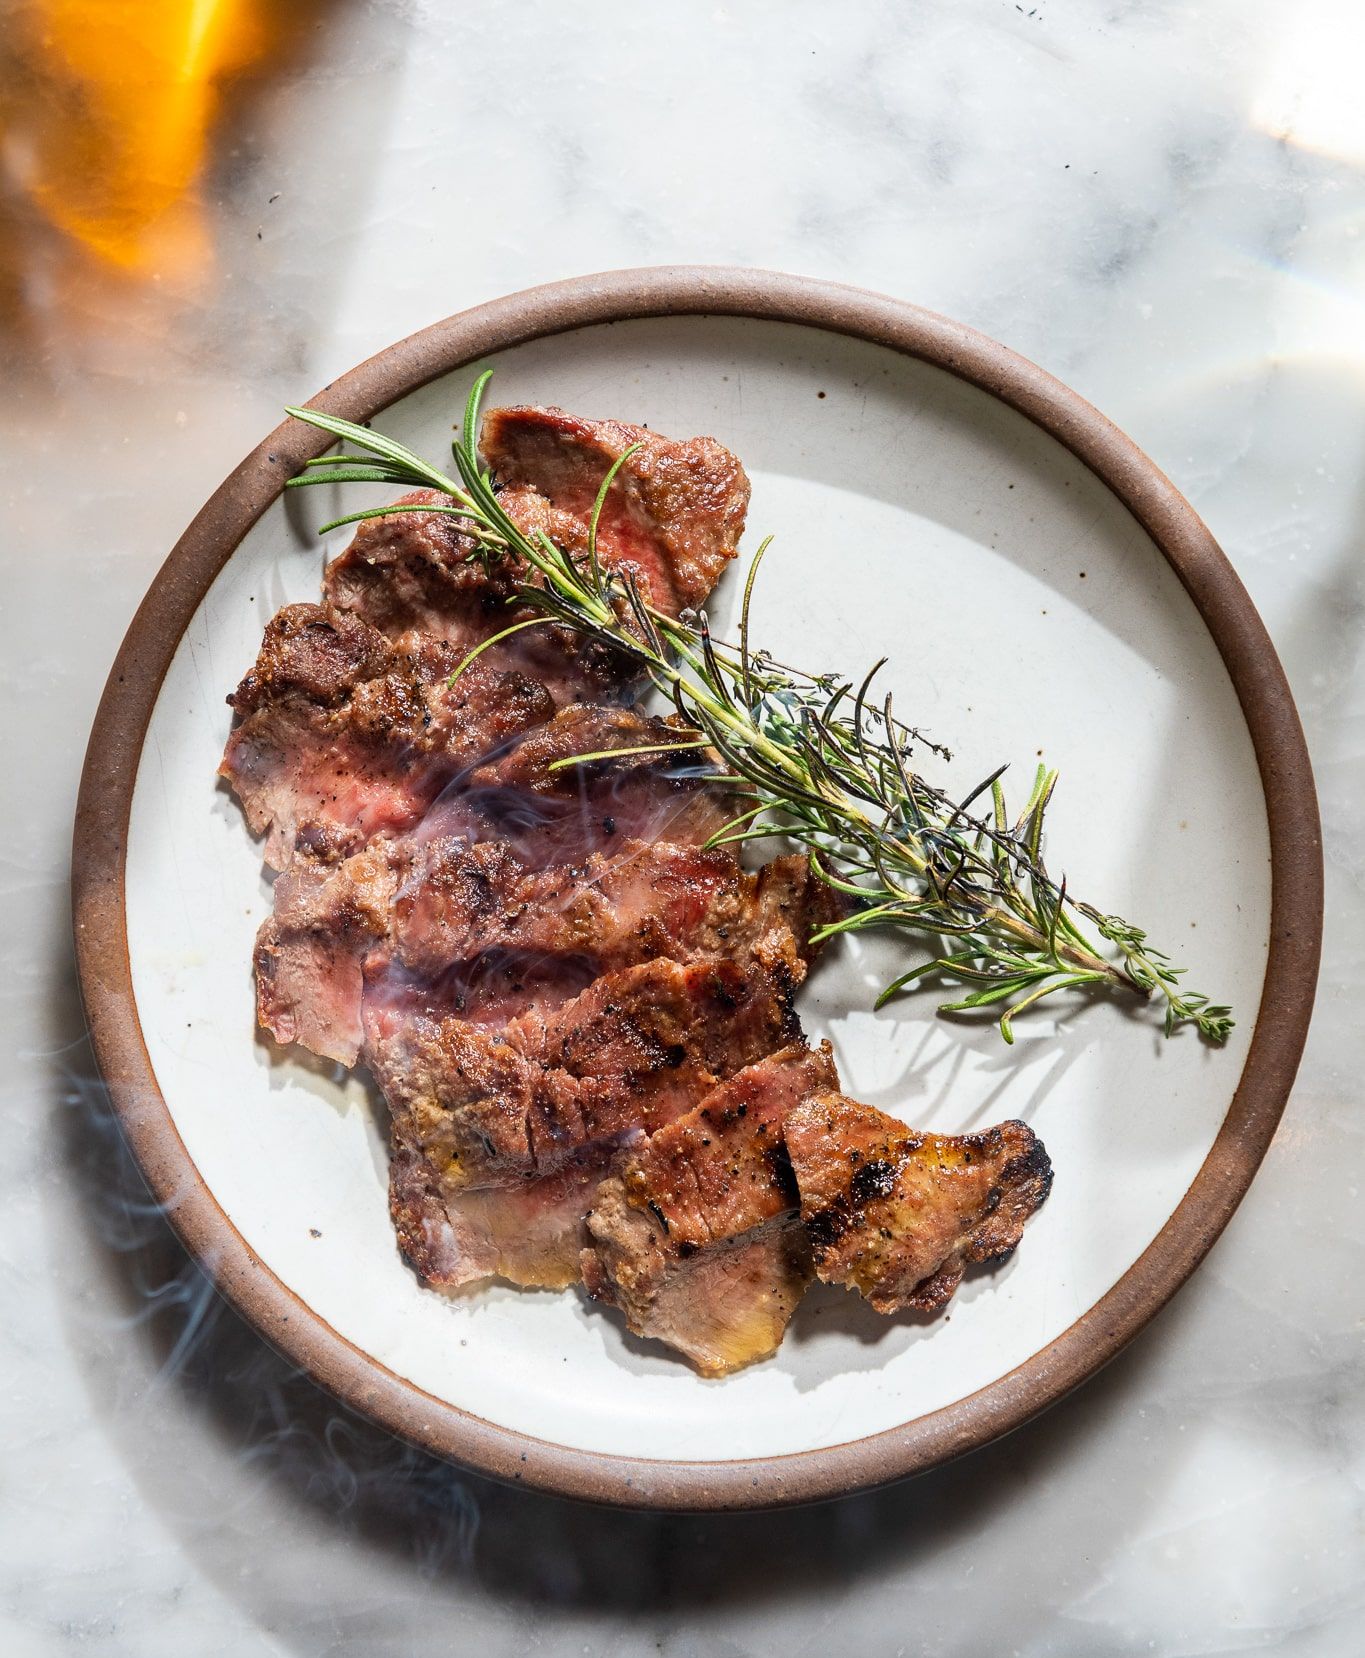 Thin sliced steak plated on East Fork Eggshell plate with rosemary and smoke 